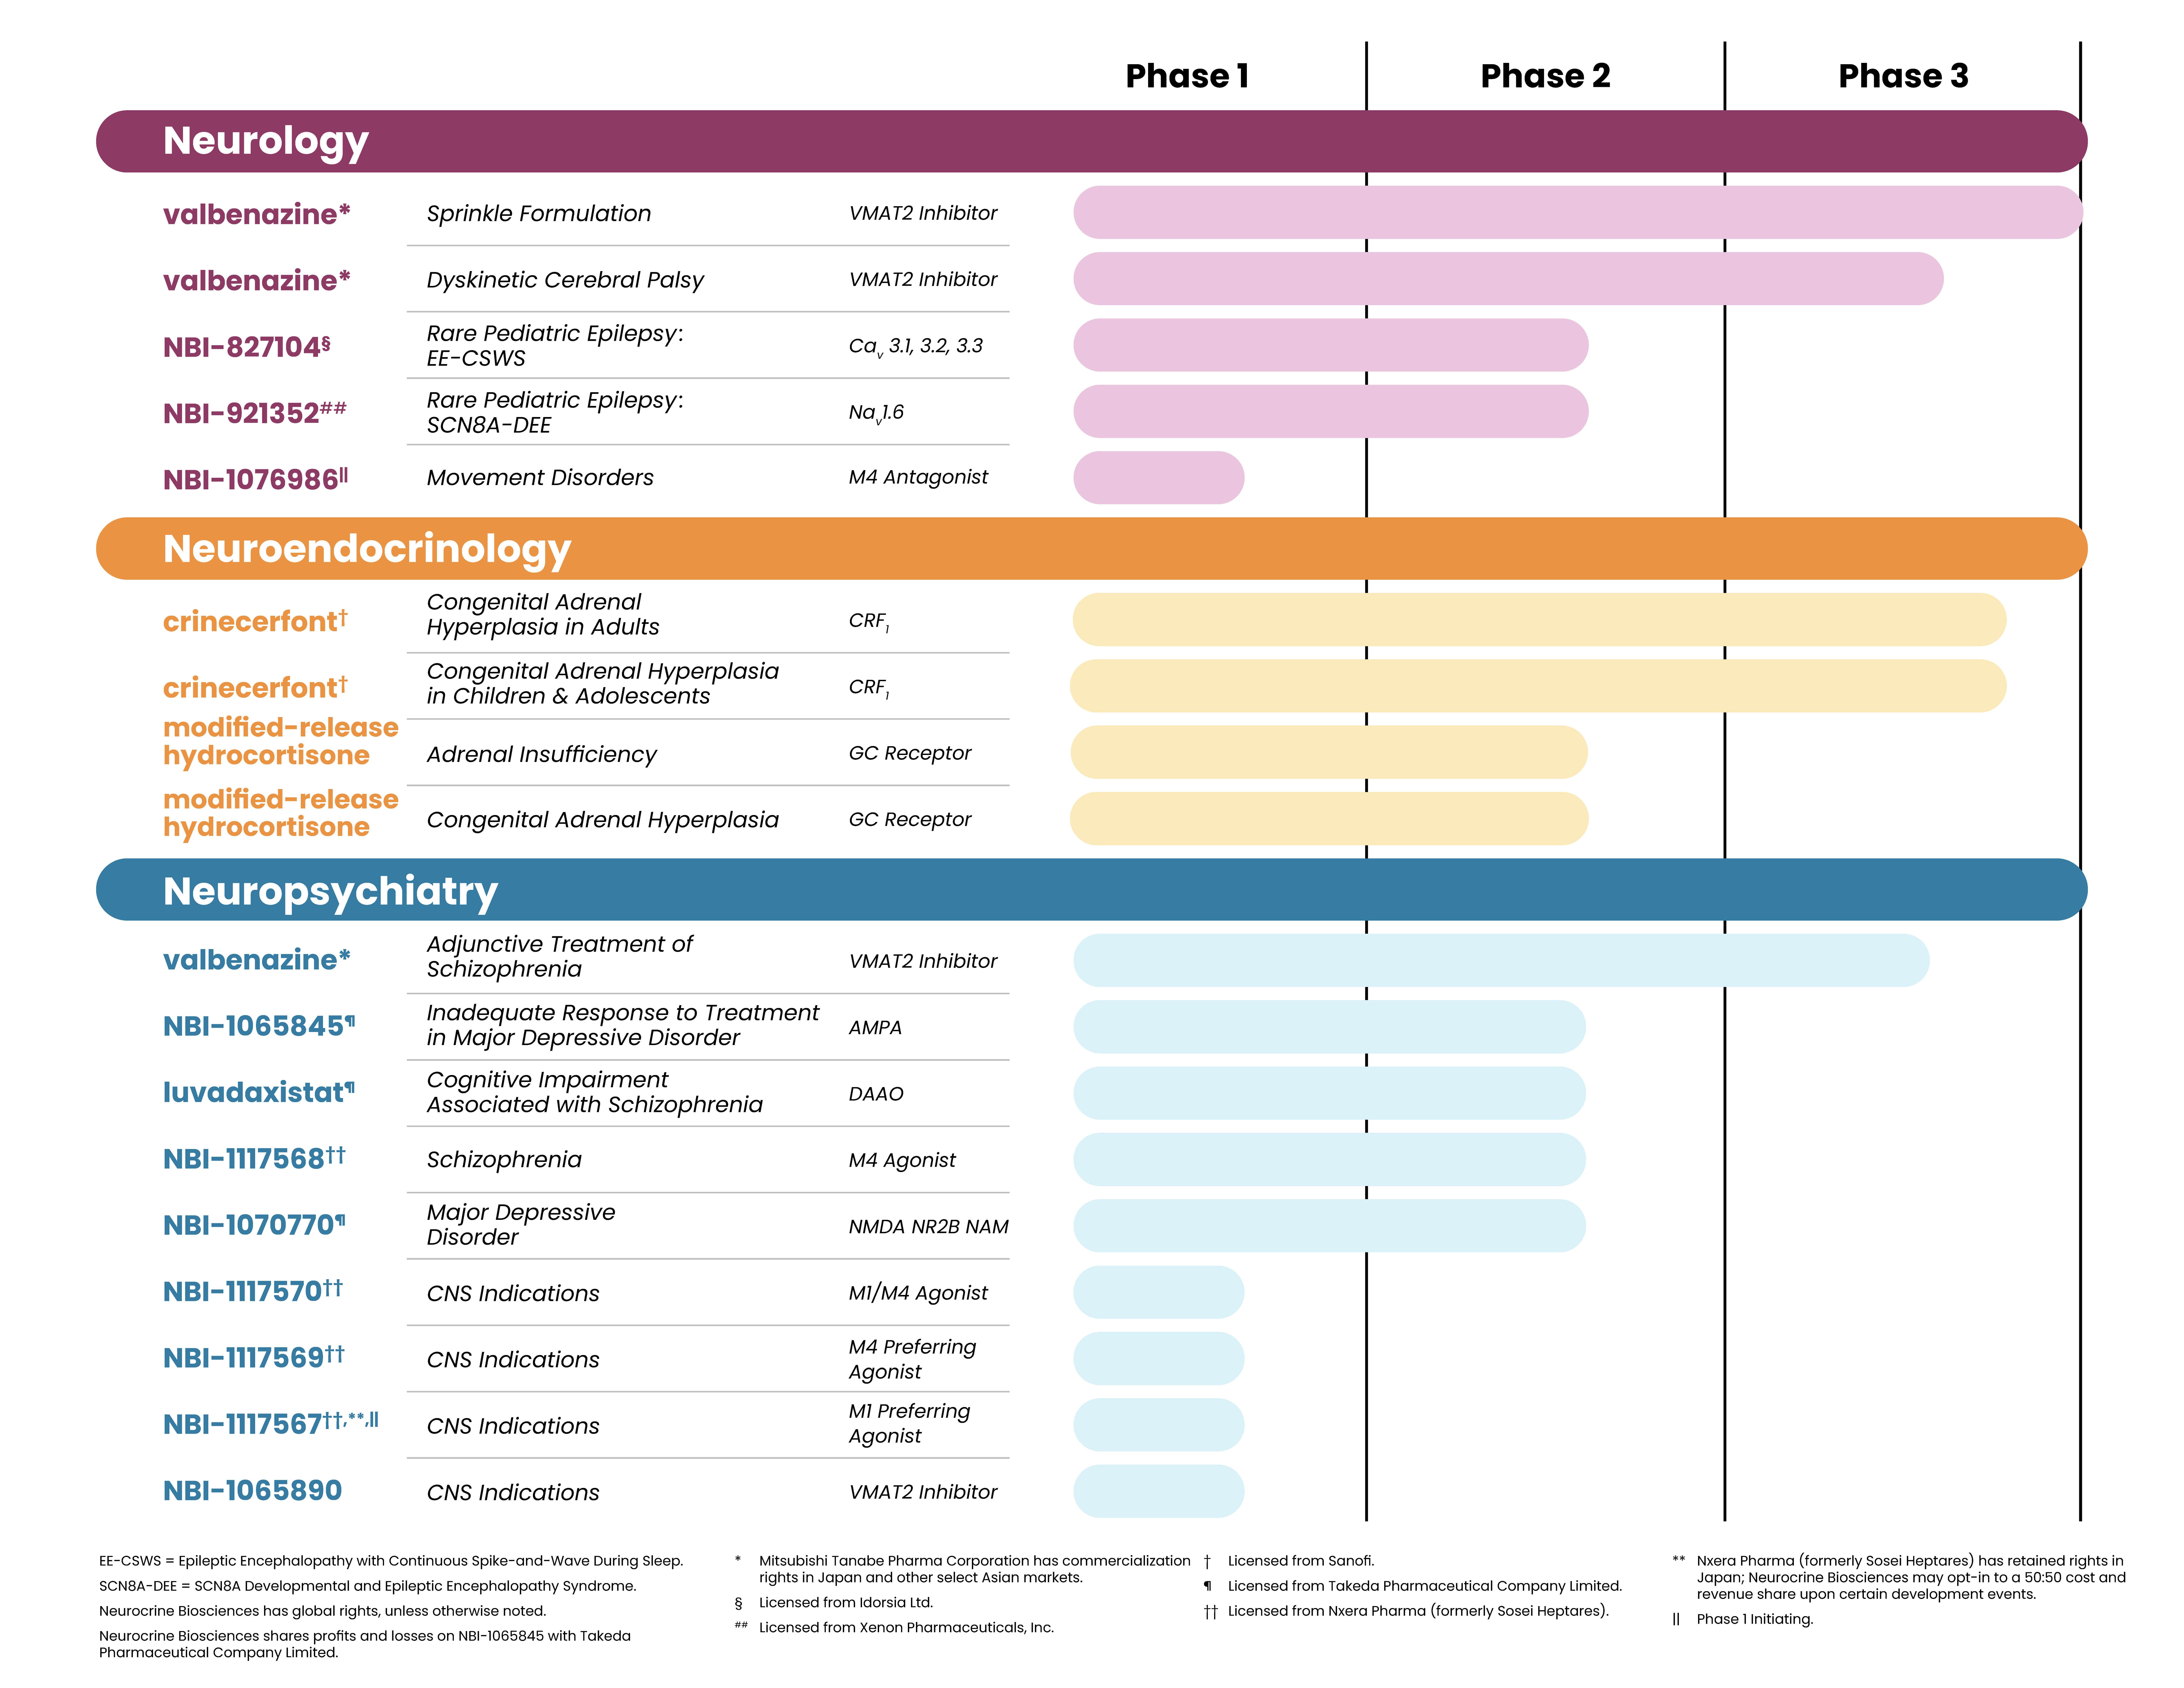 Pipeline chart of investigational therapies